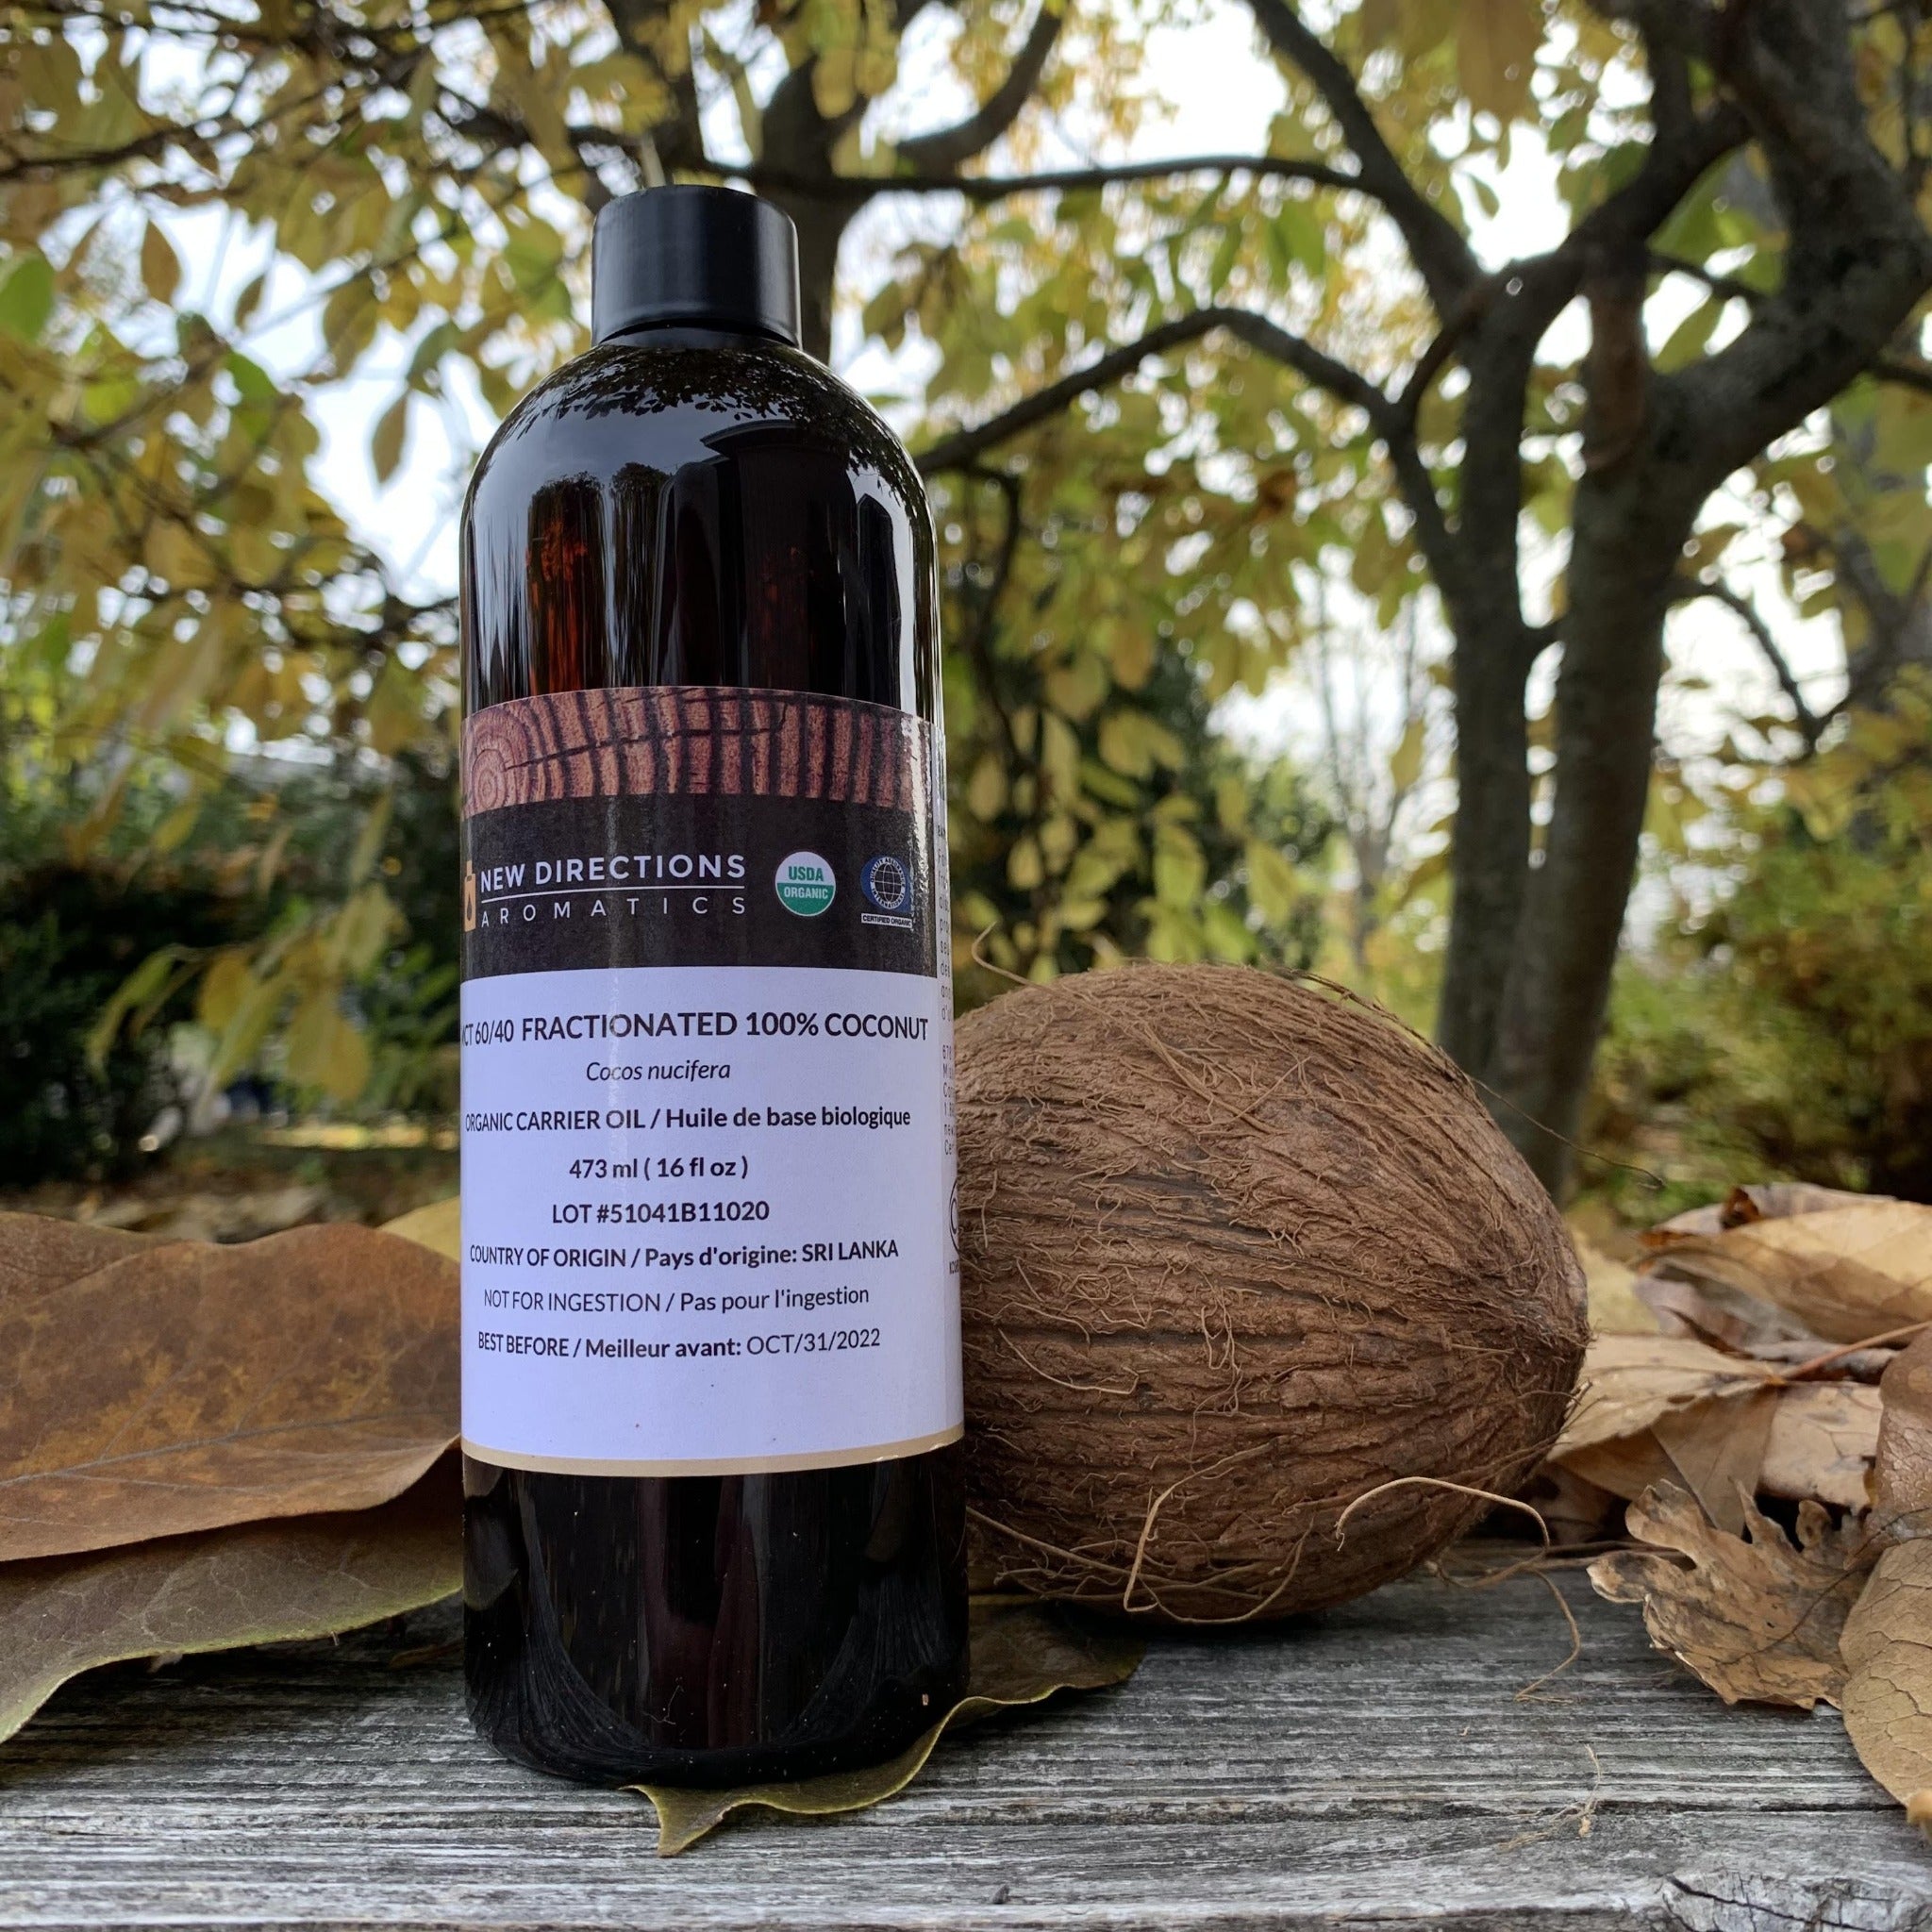 USDA Organic Fractionated Coconut Oil for Massage & Aromatherapy